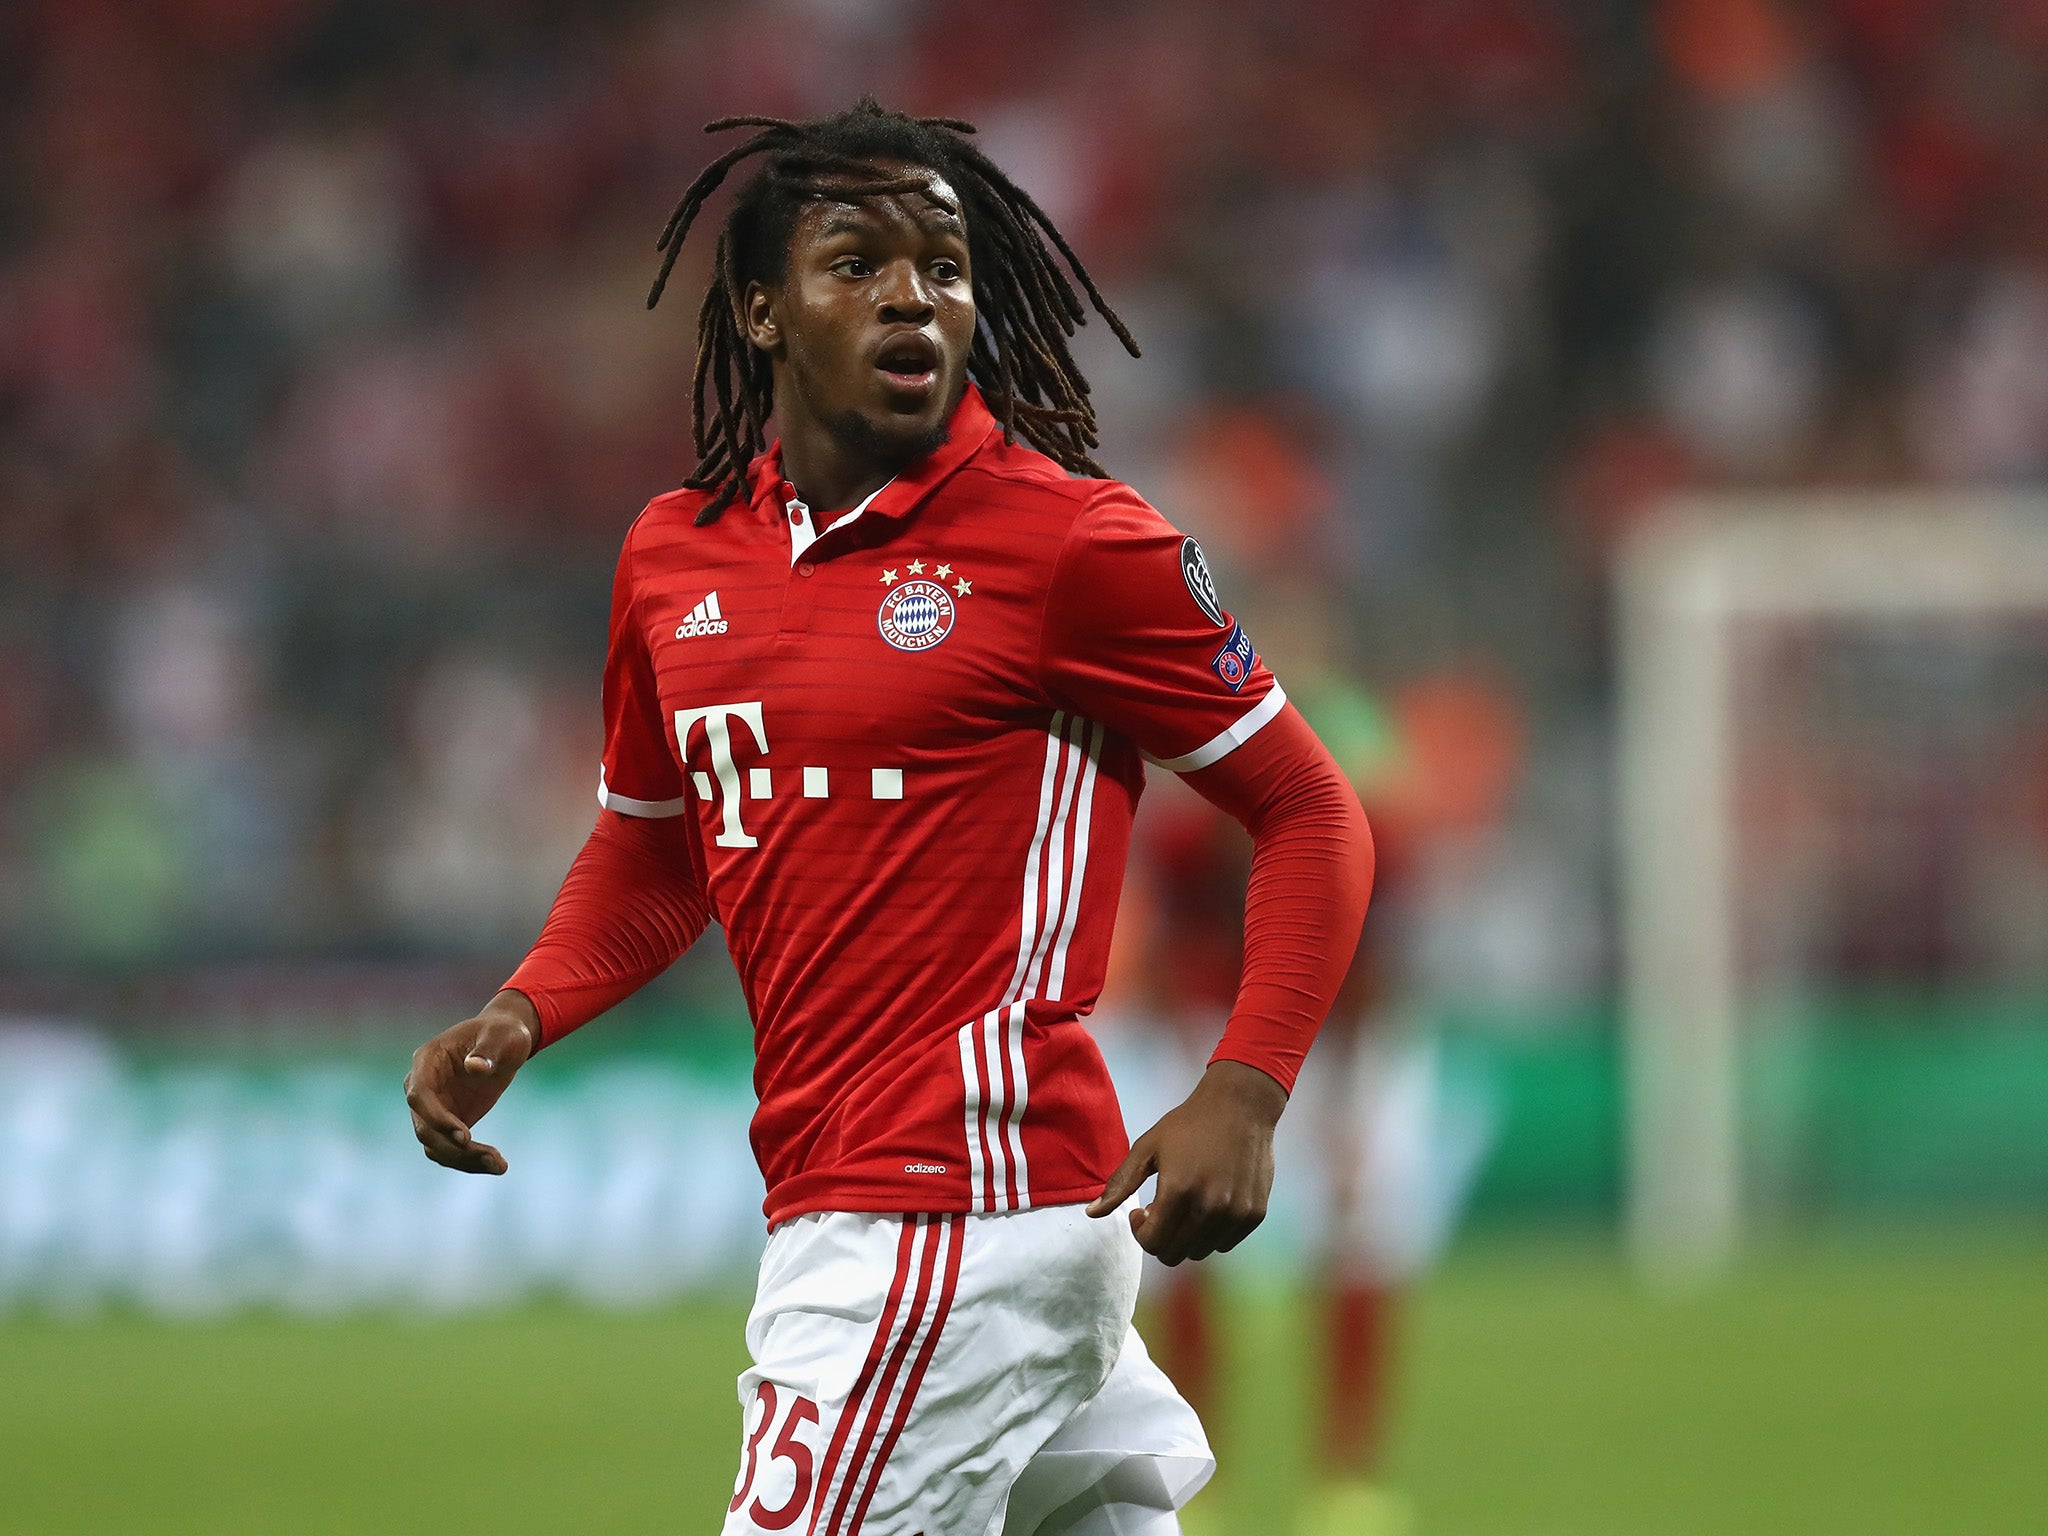 Renato Sanches joined Bayern Munich for £36m